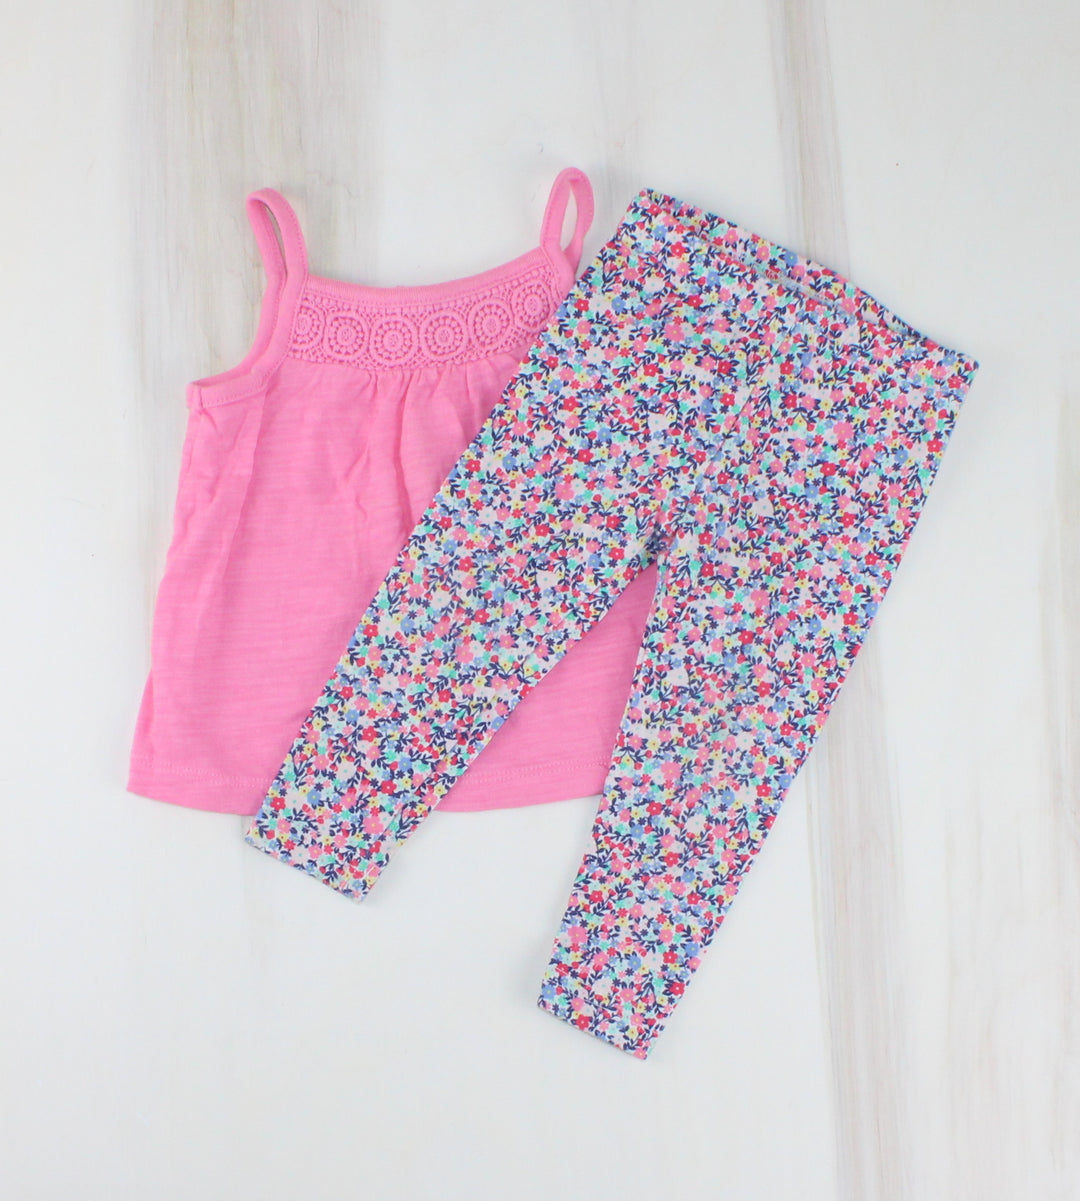 CARTERS PINK FLORAL OUTFIT 9M EUC